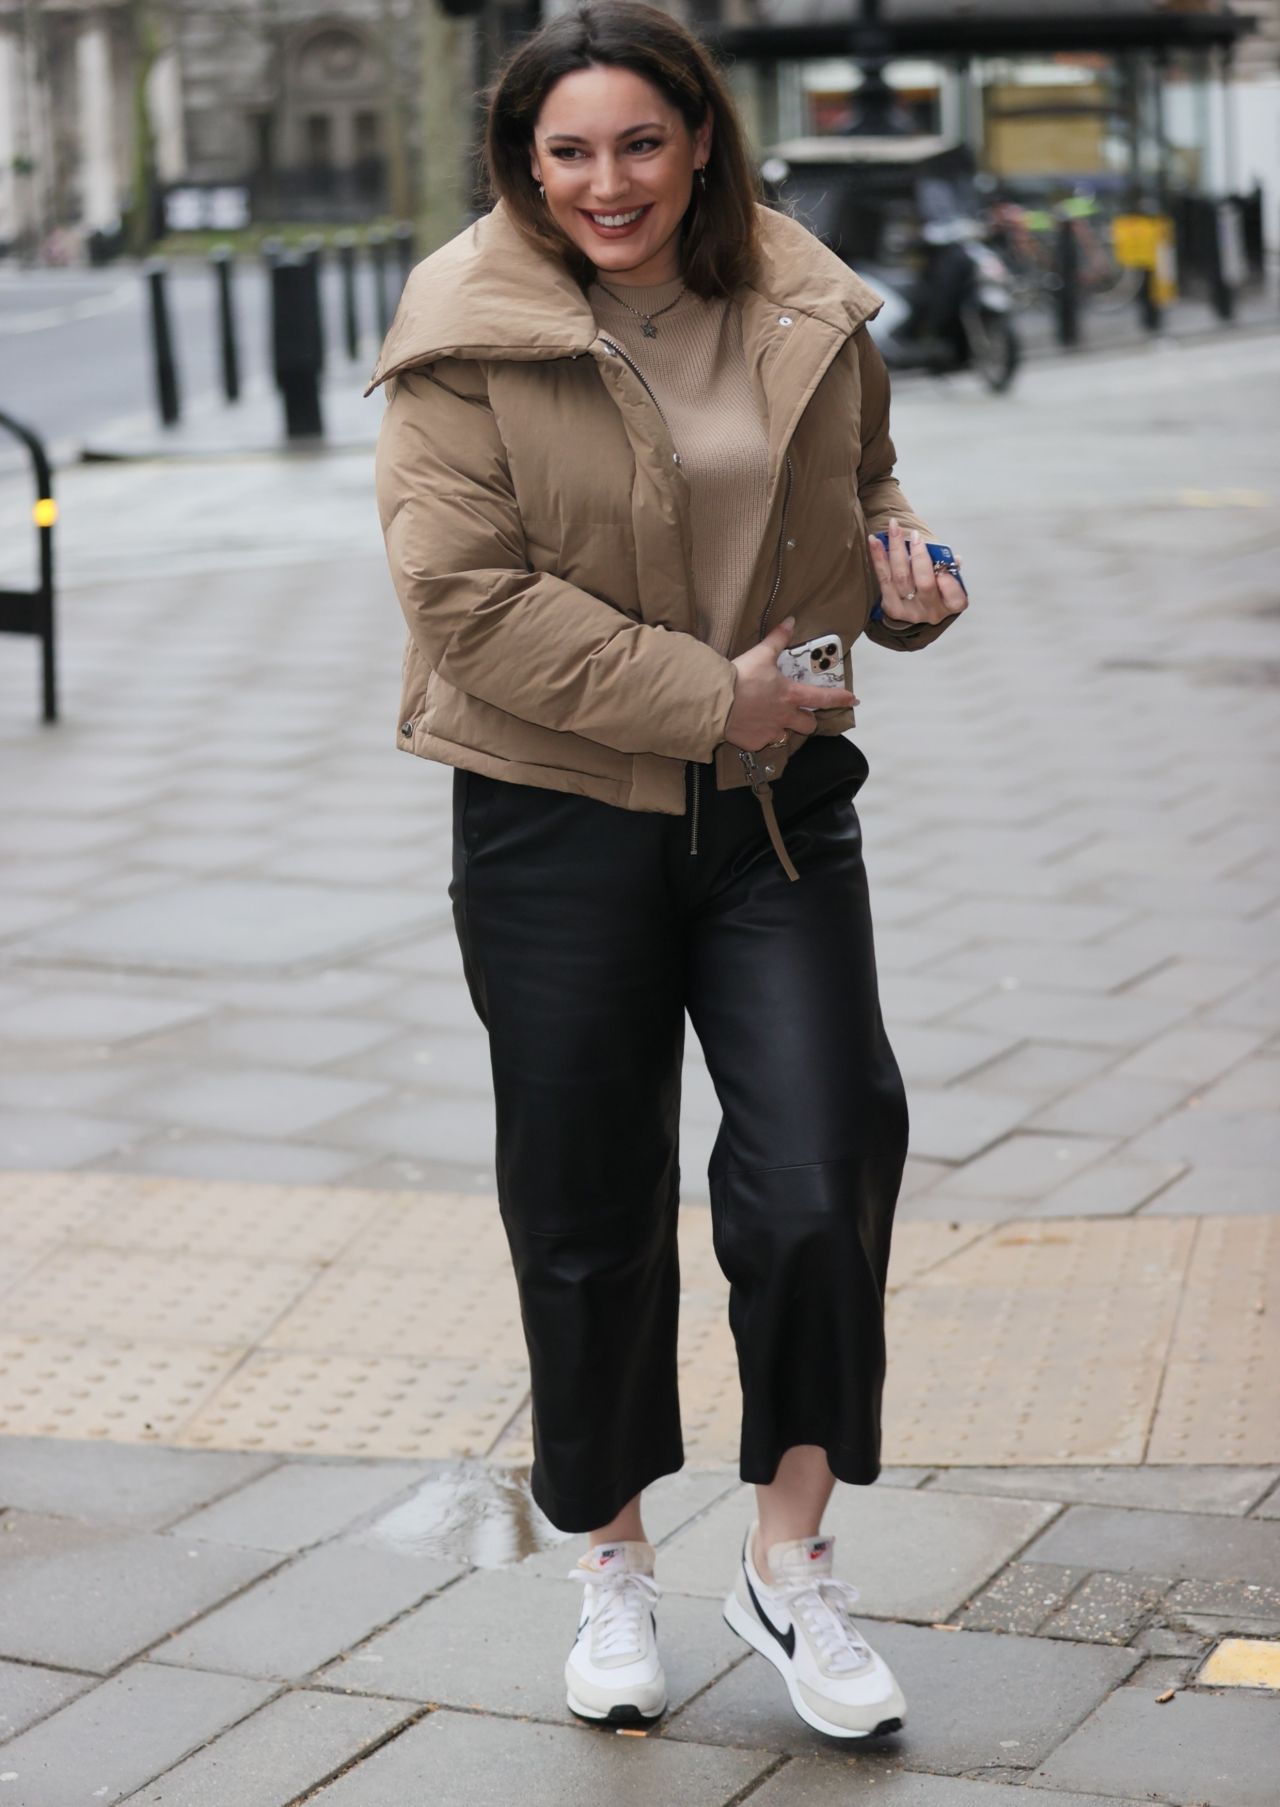 Kelly Brook in Comfy Outfit - London 02/22/2021 • CelebMafia